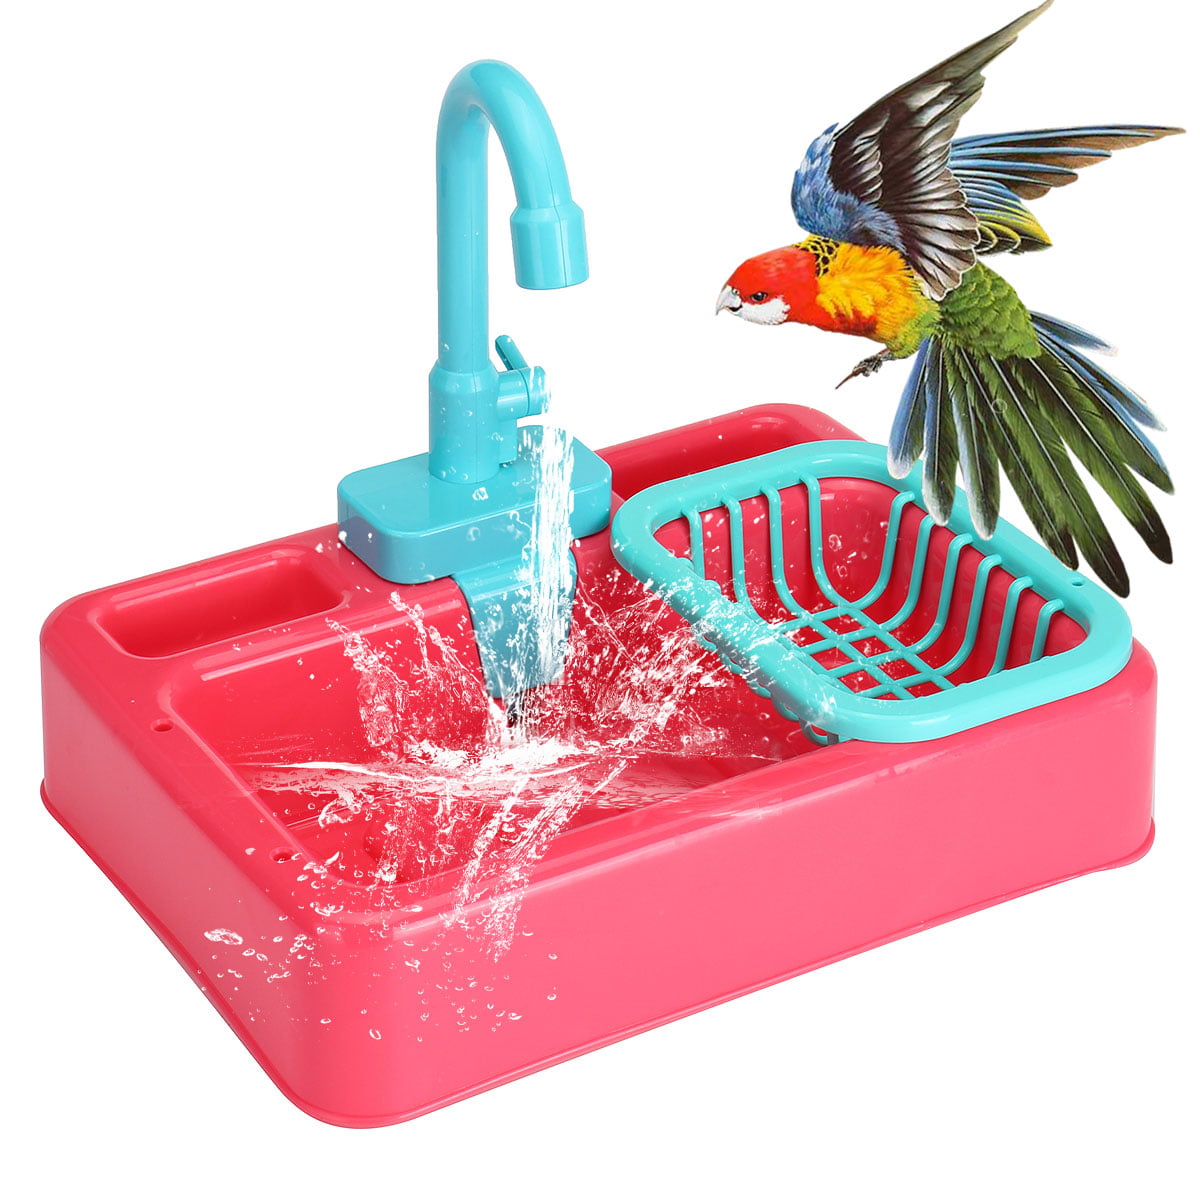 Red Bird Bath Bowl Parrot Bath Bird Bathing Supplies Bird Automatic Bathtub Swimming Pool Toy Bath Shower Water Dispenser for Parrot budgie Parakeet Cockatiel Finch Canary Grey Cockatoo Macaw Cage Healthy